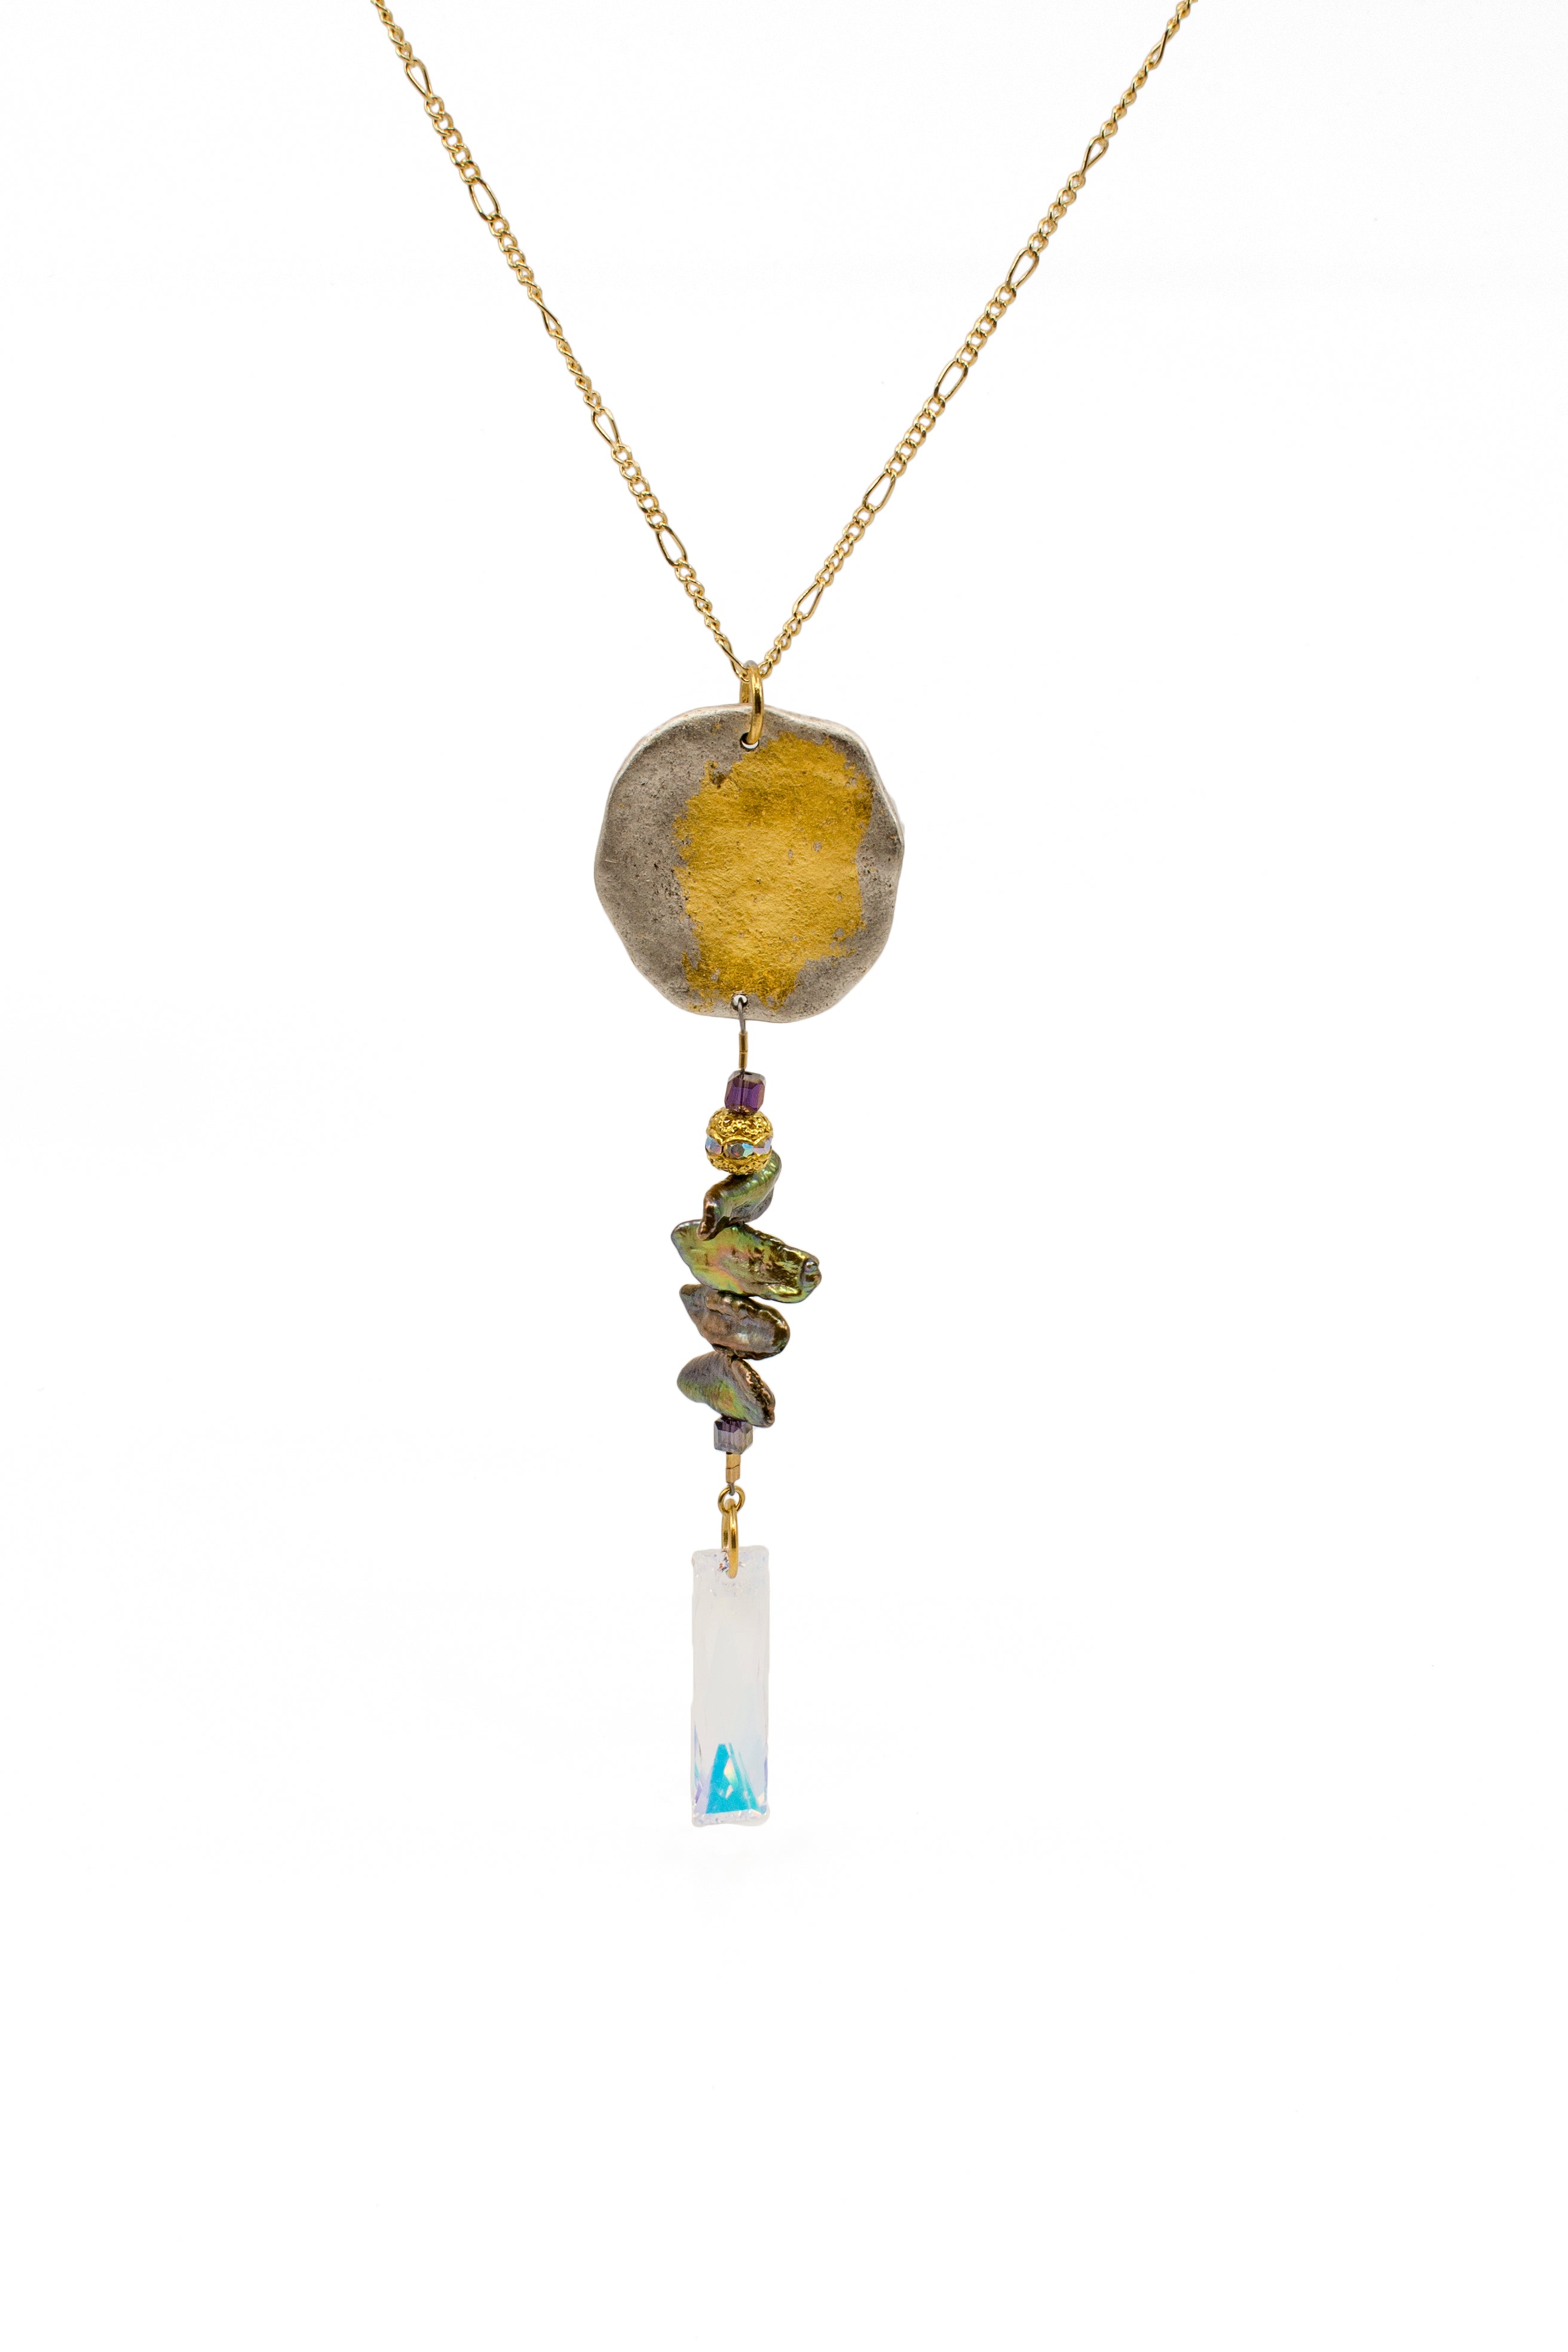 Pewter Pendant with 23K Gold Leaf Shell & Swarovski Baguettes on Gold Plated Chain